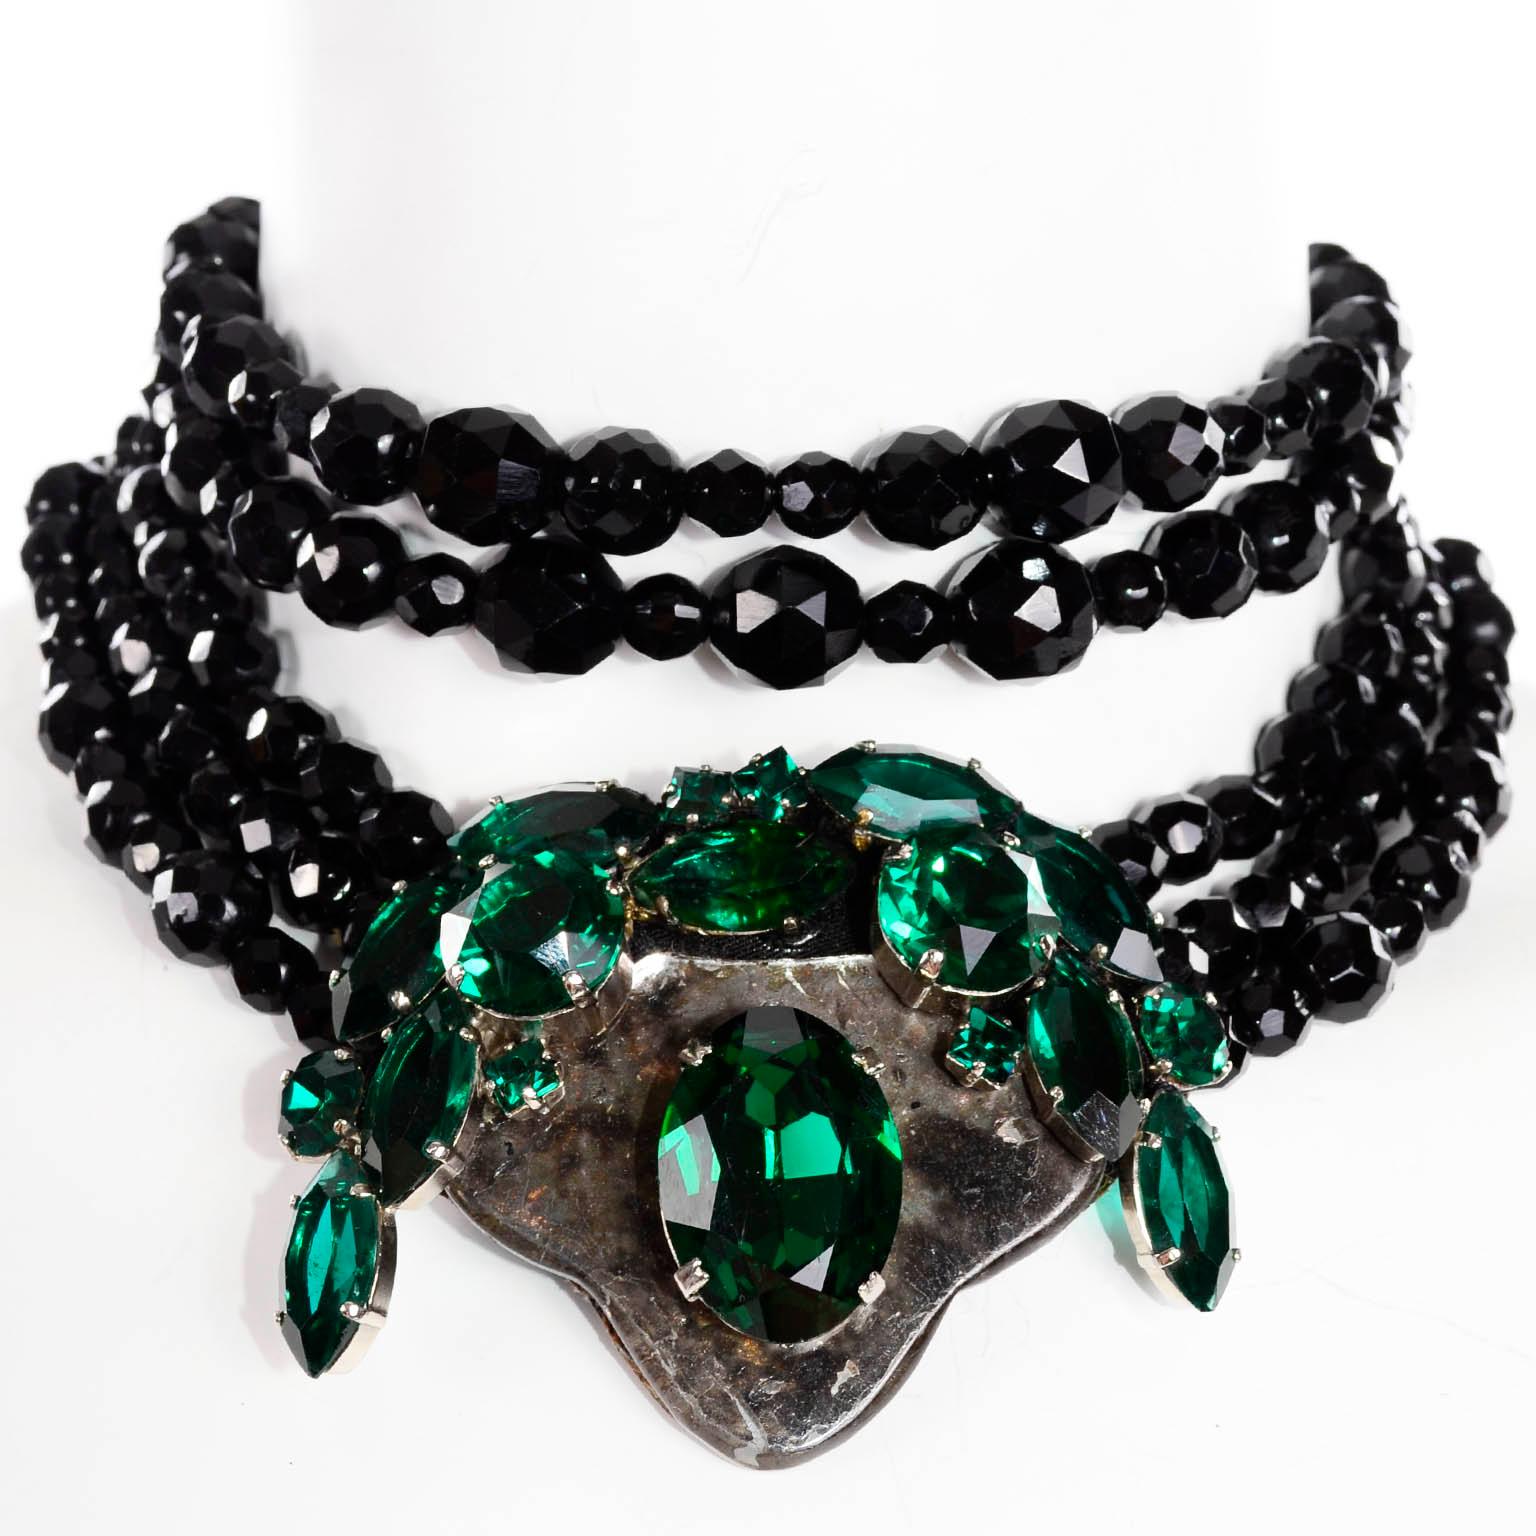 Erare 1980s Emanuel Ungaro Couture Black & Green Choker Mughal Inspired Necklace 2